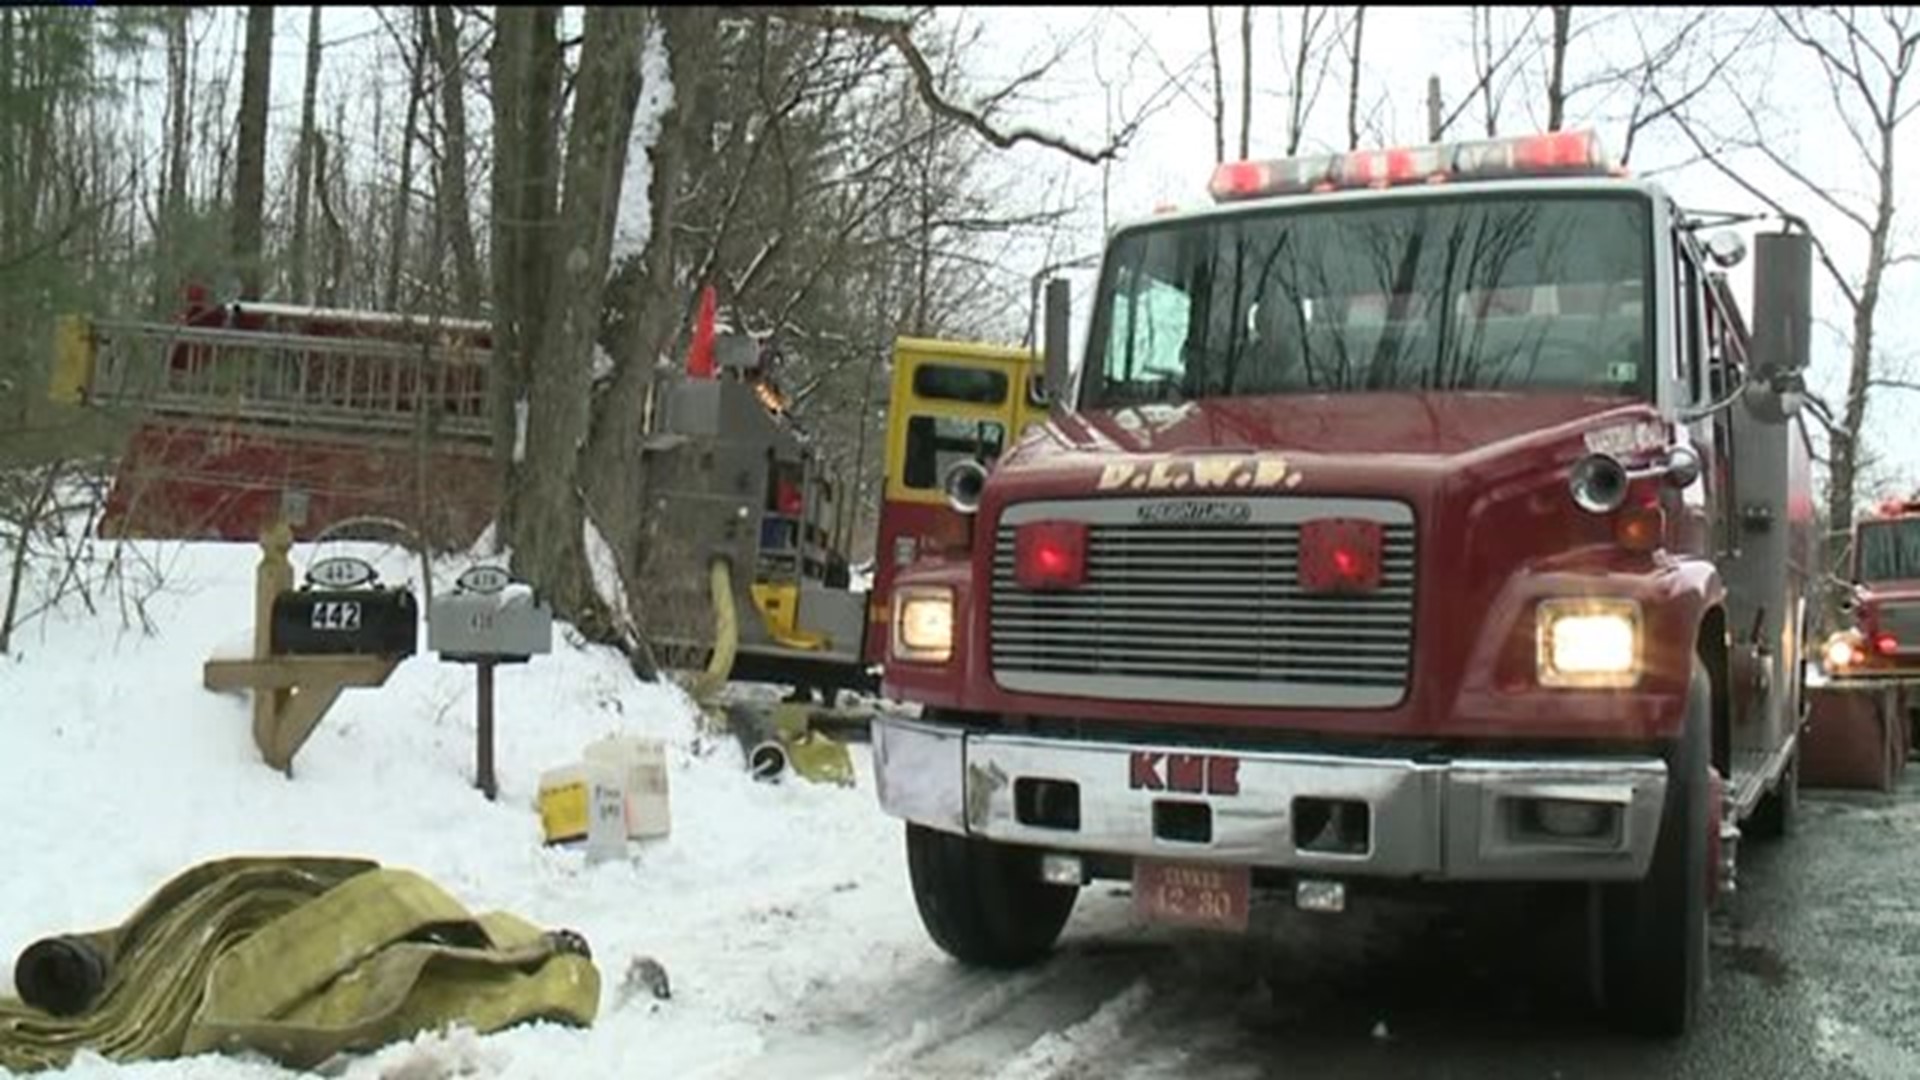 Firefighters Battle Flames, Distance in Schuylkill County